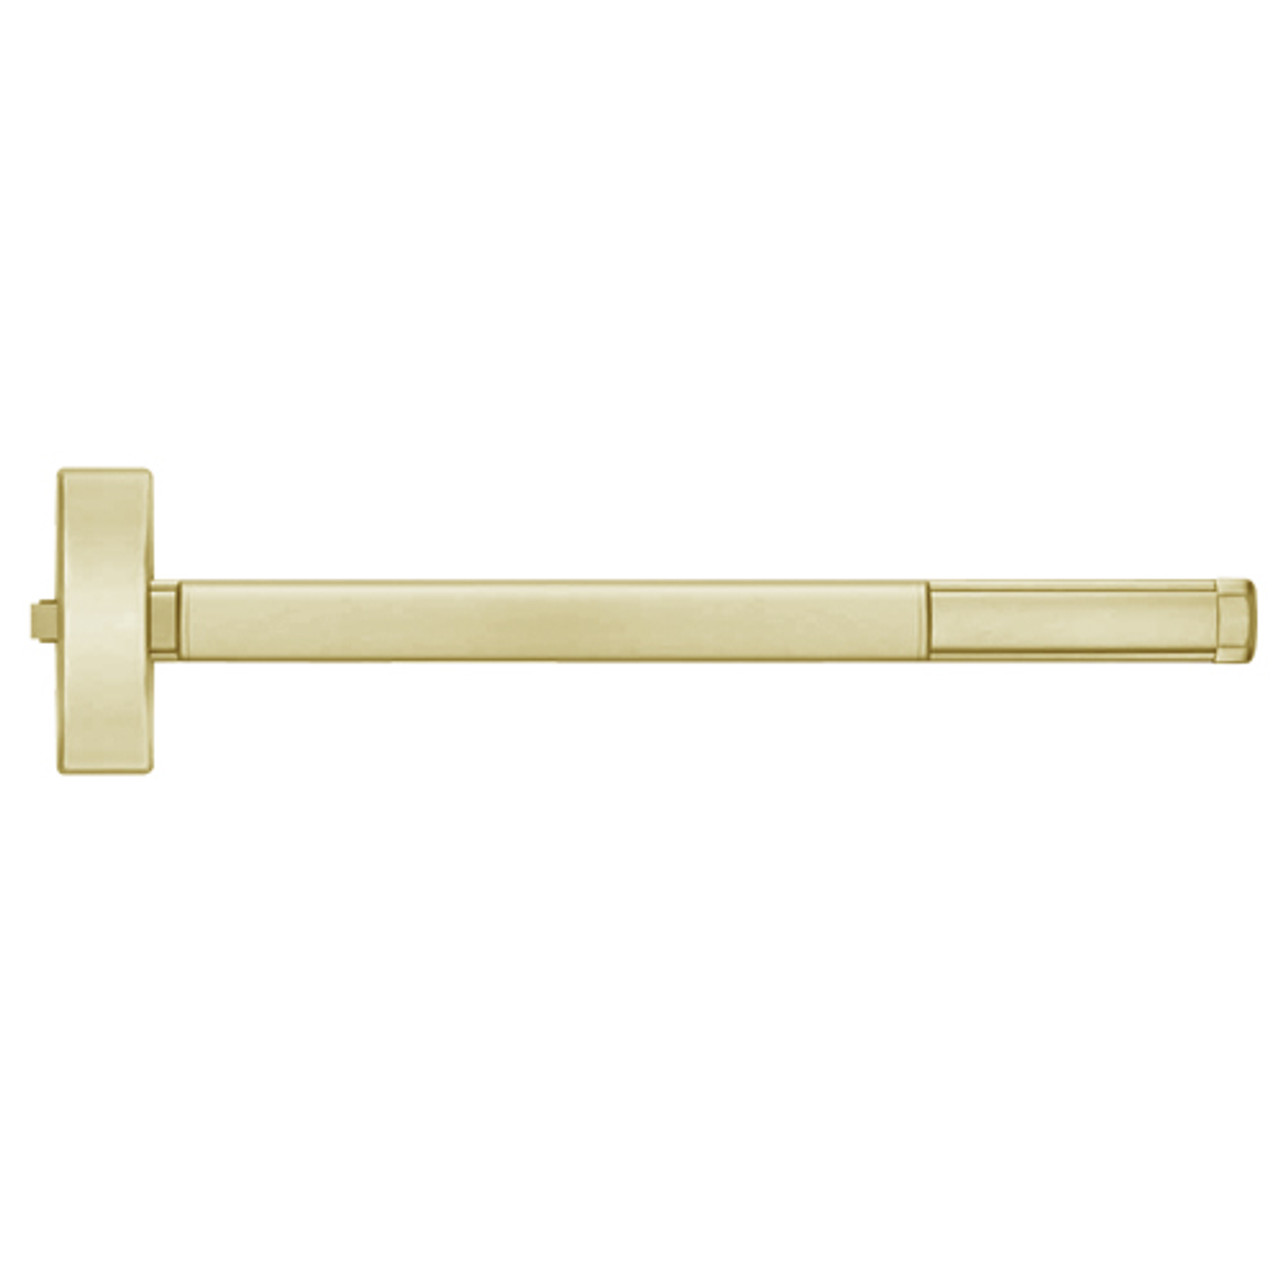 ELRFL2105-606-36 PHI 2100 Series Fire Rated Apex Rim Exit Device with Electric Latch Retraction Prepped for Key Controls Thumb Piece in Satin Brass Finish